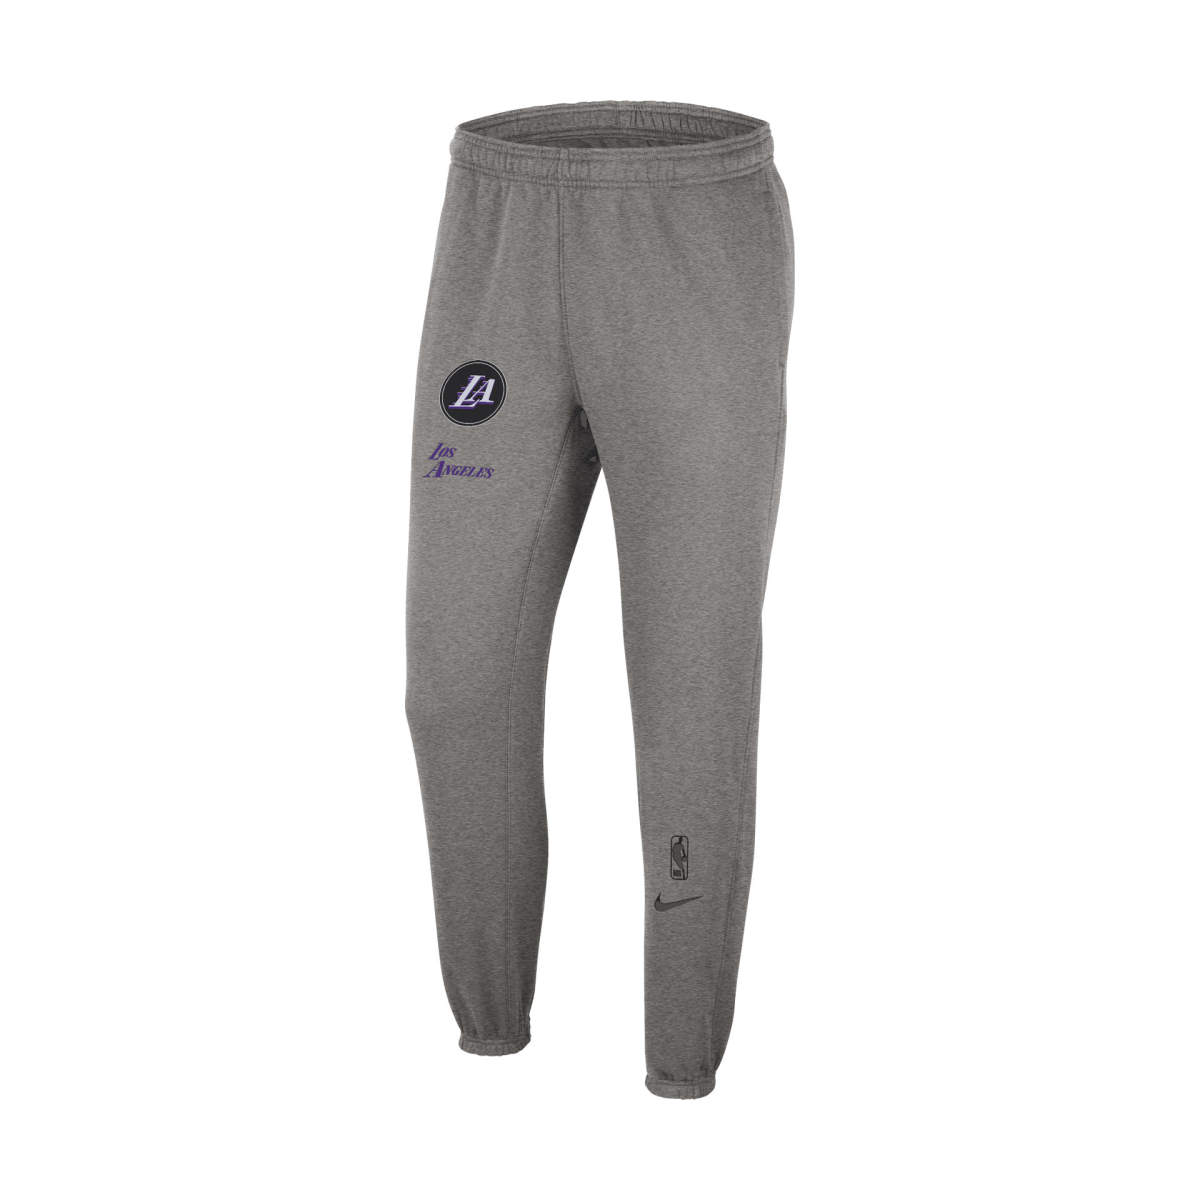 Los angeles lakers ce courtside pant